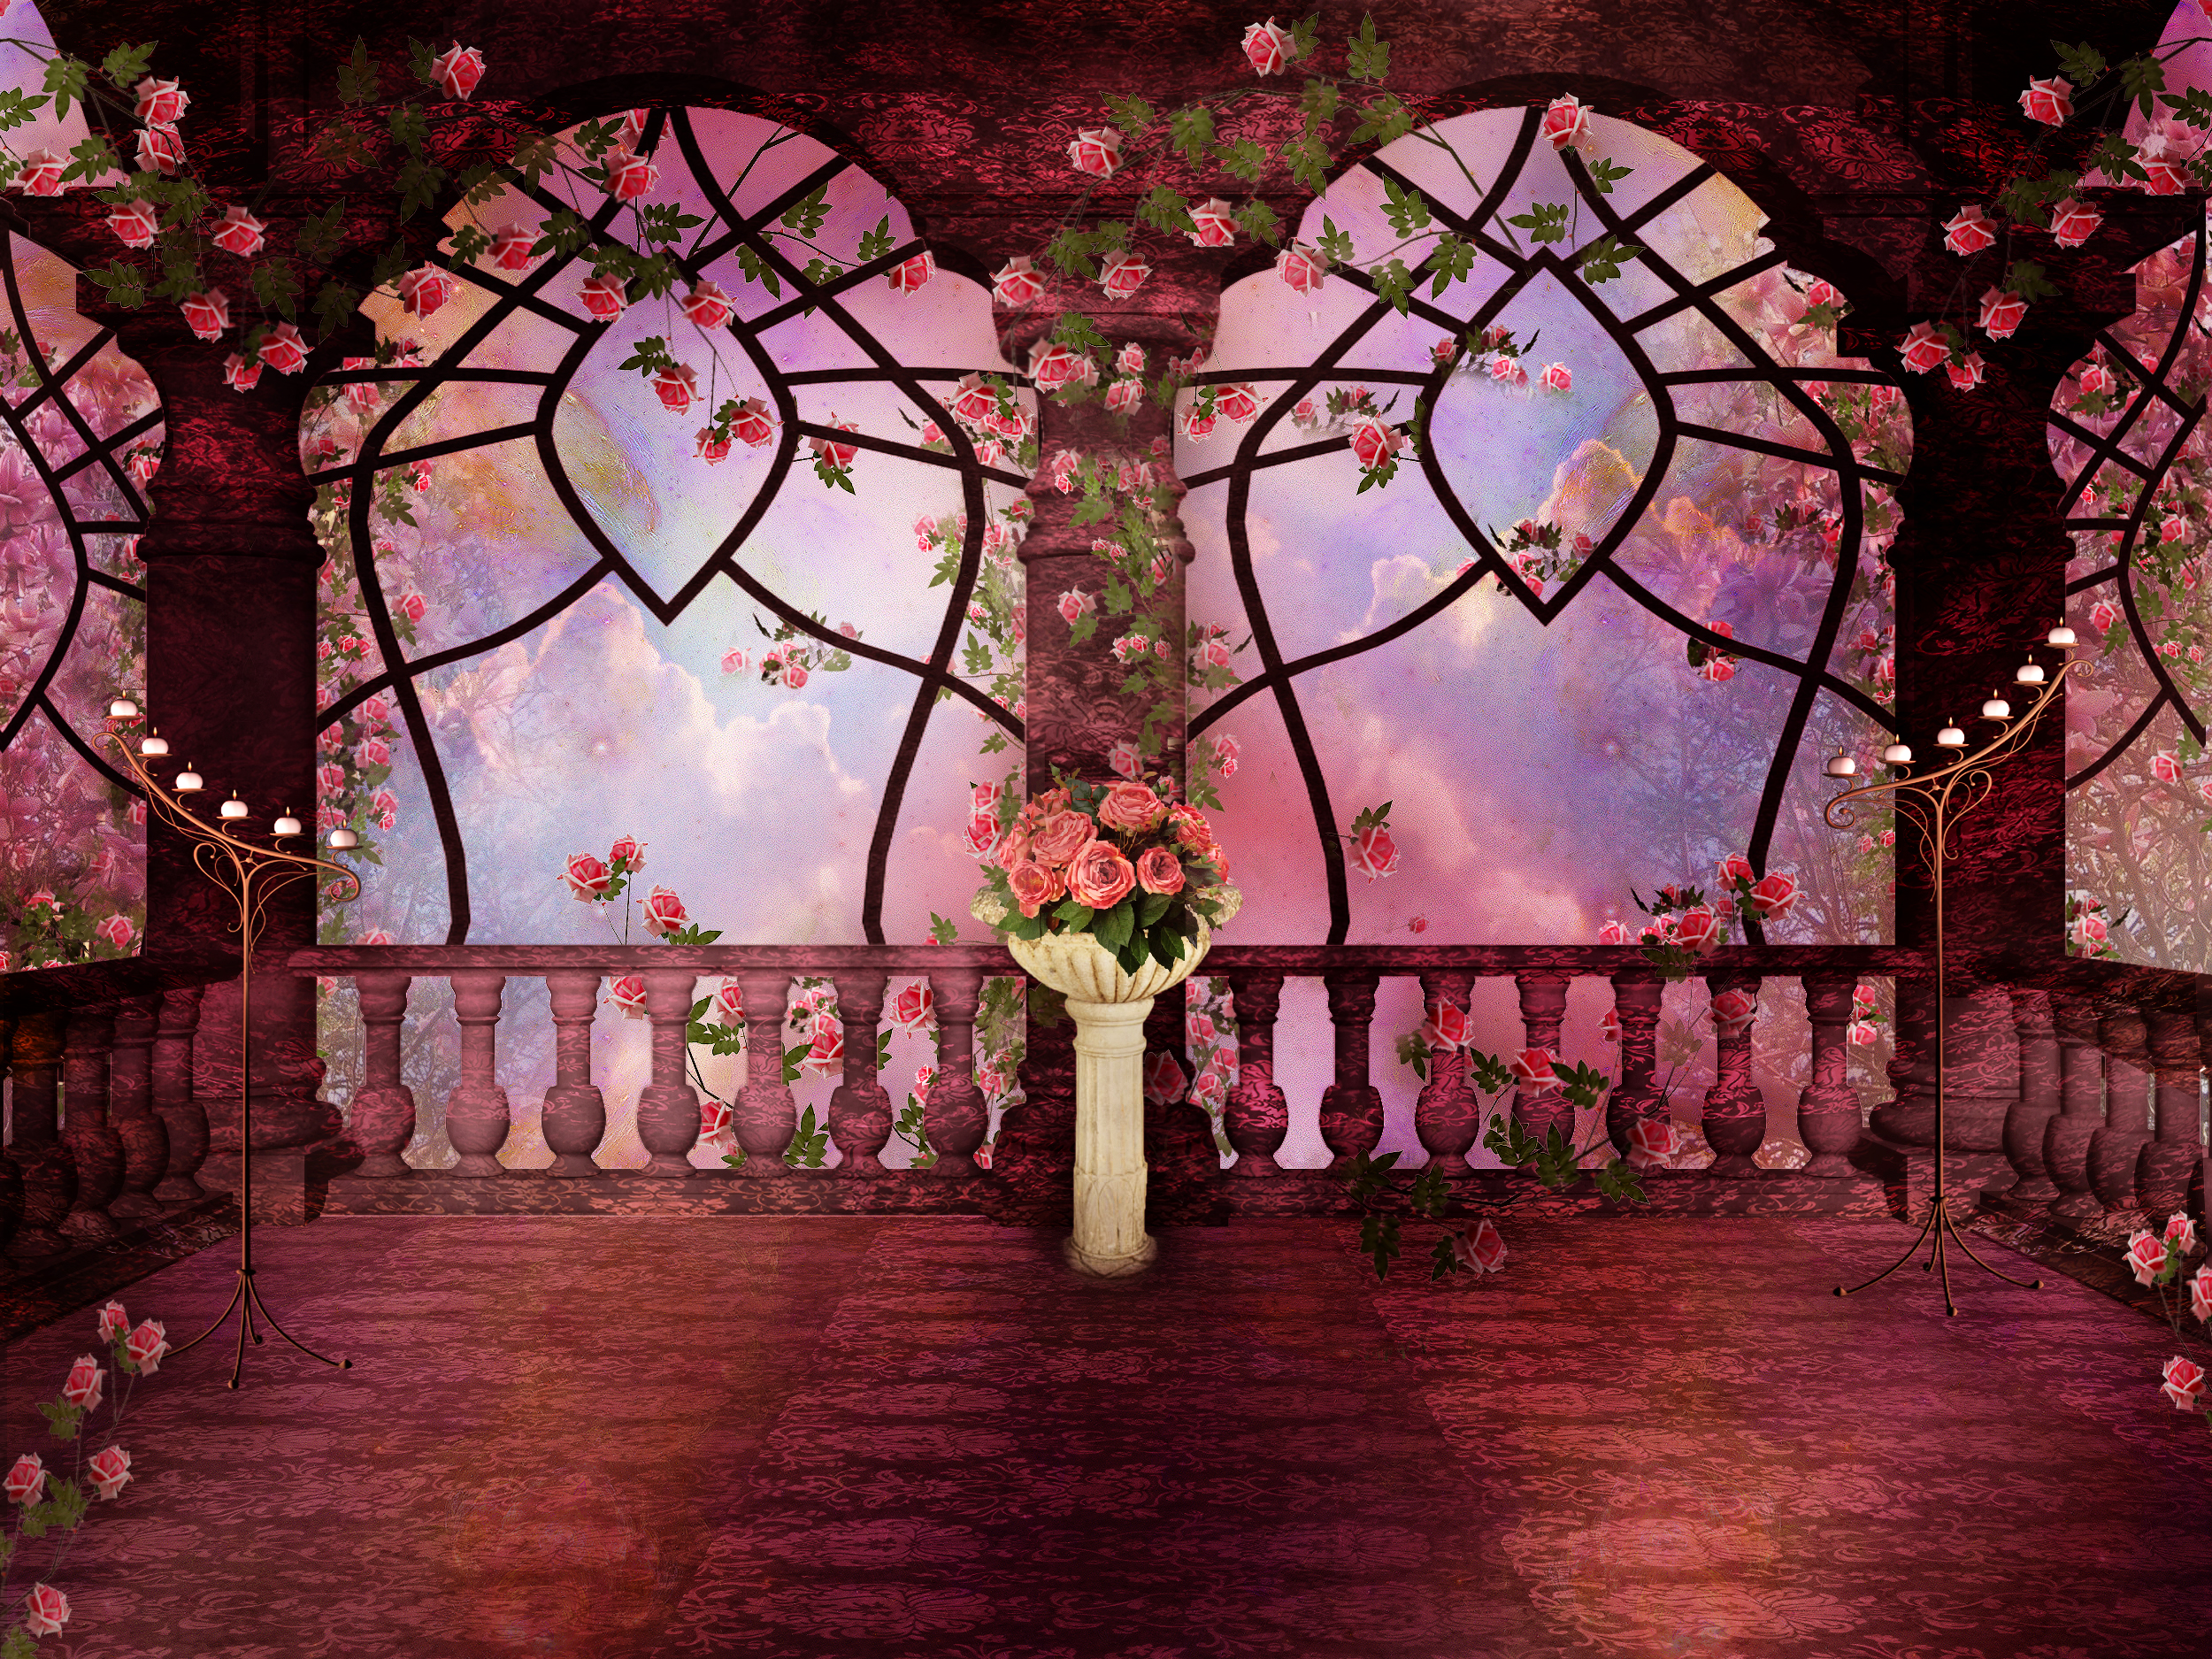 artistic, rose, arch, candle, columns, fantasy, gothic, pink rose cellphone